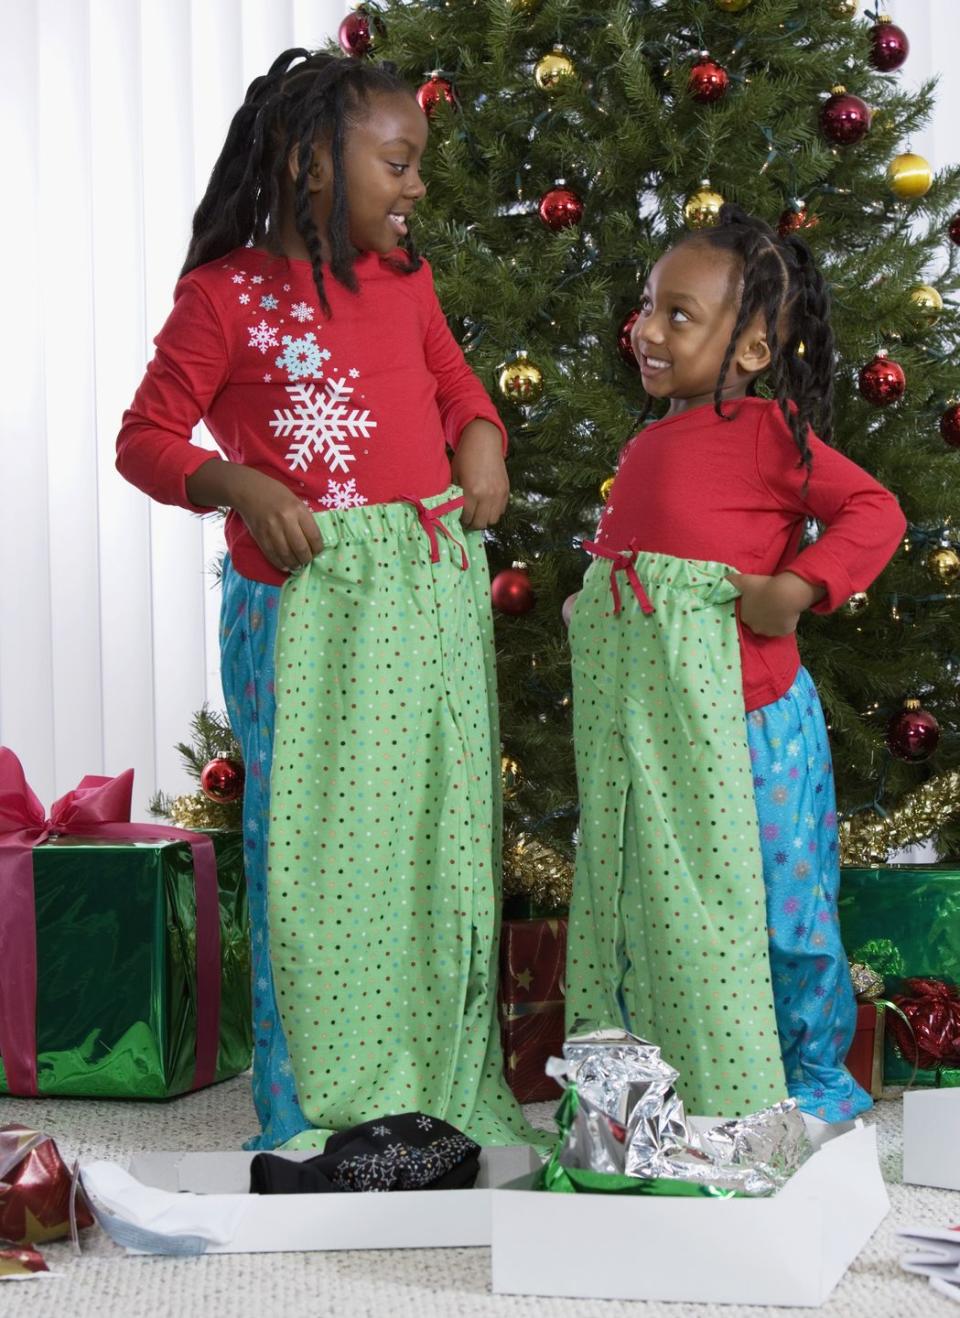 3) Wear matching pajamas with your family or roommates.